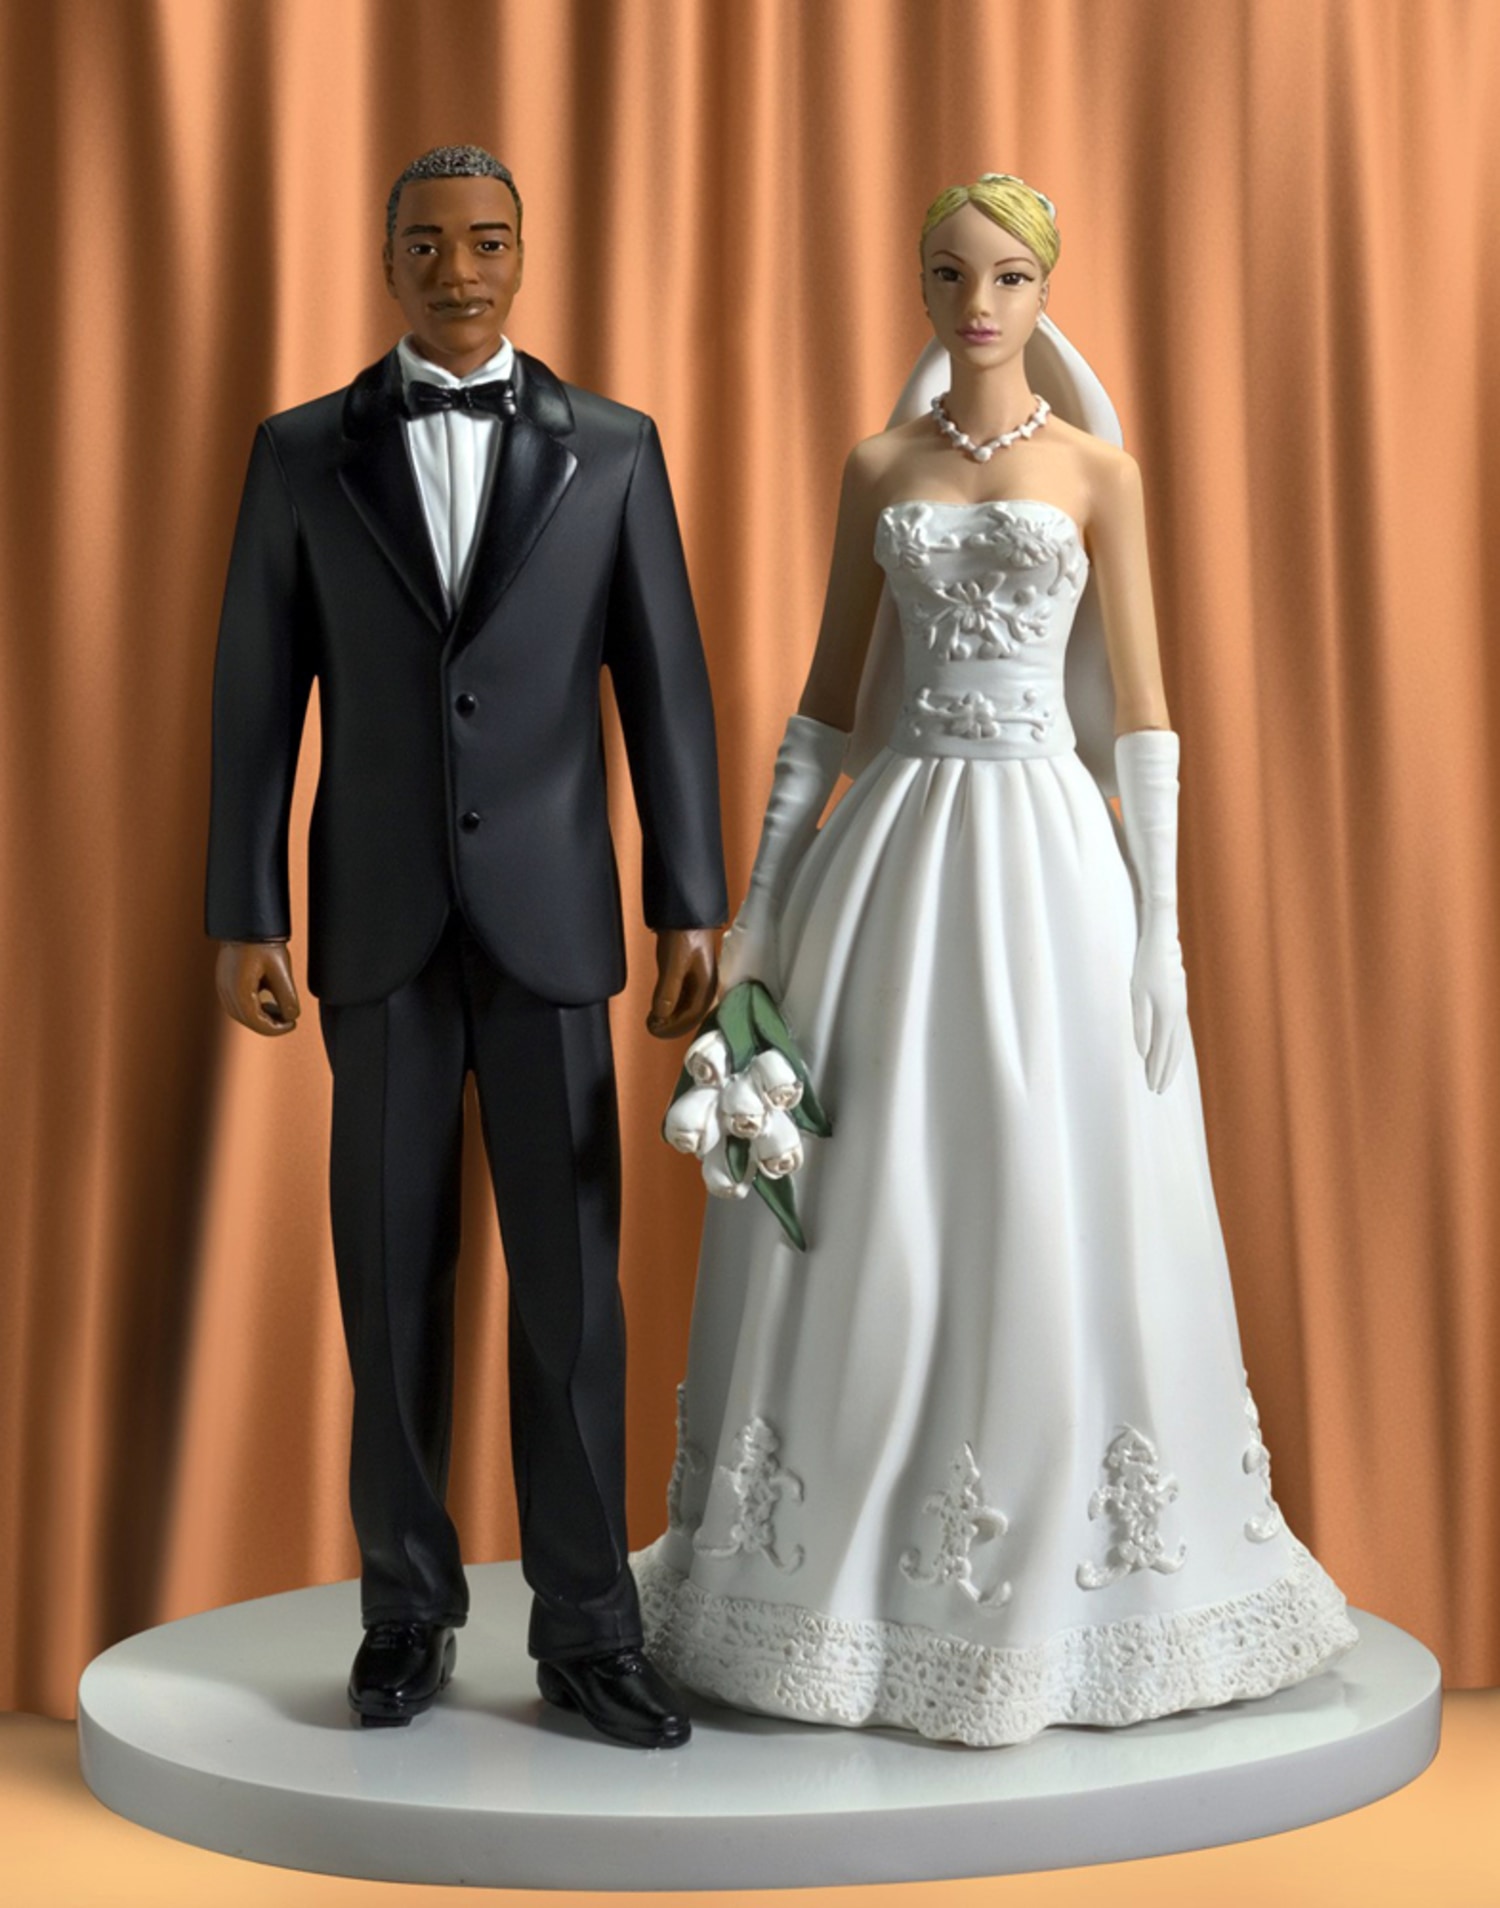 Cake toppers break with cookie-cutter past